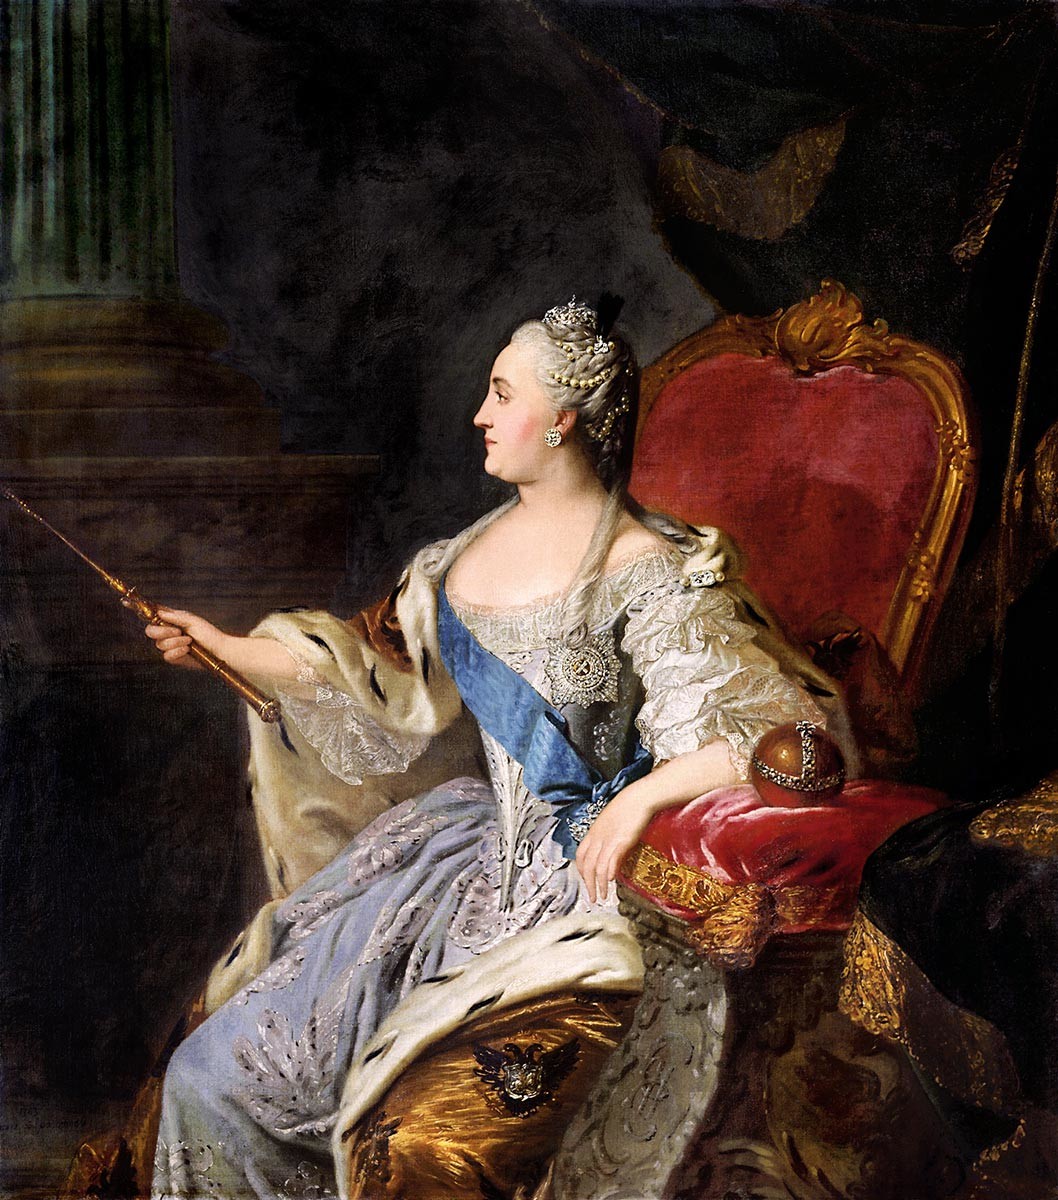 F.Rokotov. Portrait of Catherine the Great, 1763